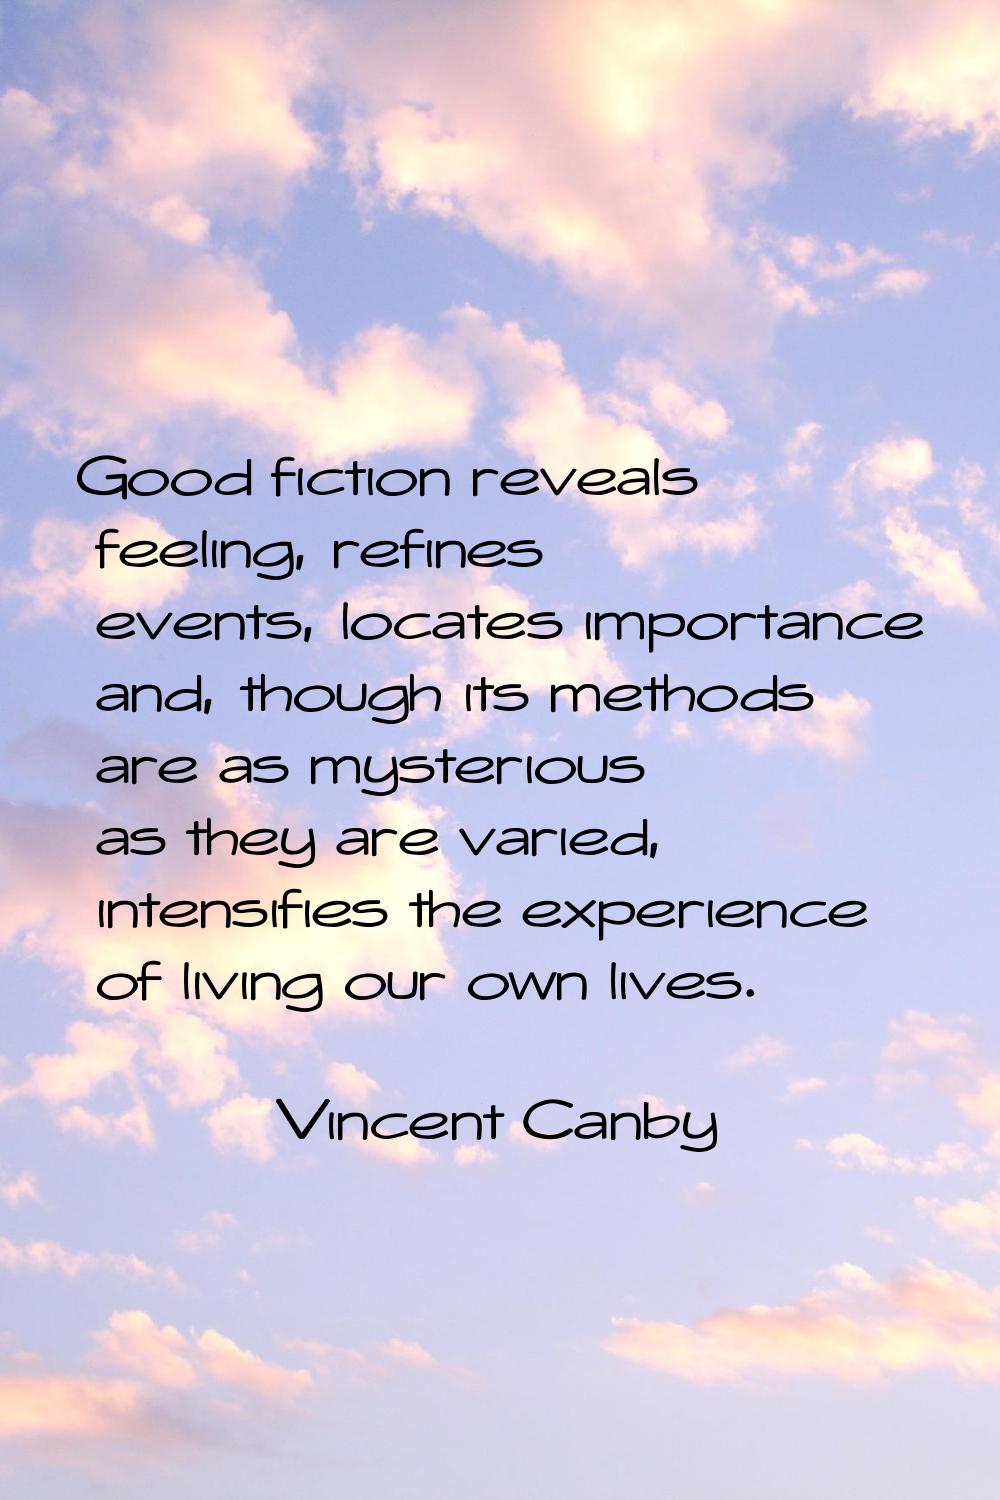 Good fiction reveals feeling, refines events, locates importance and, though its methods are as mys